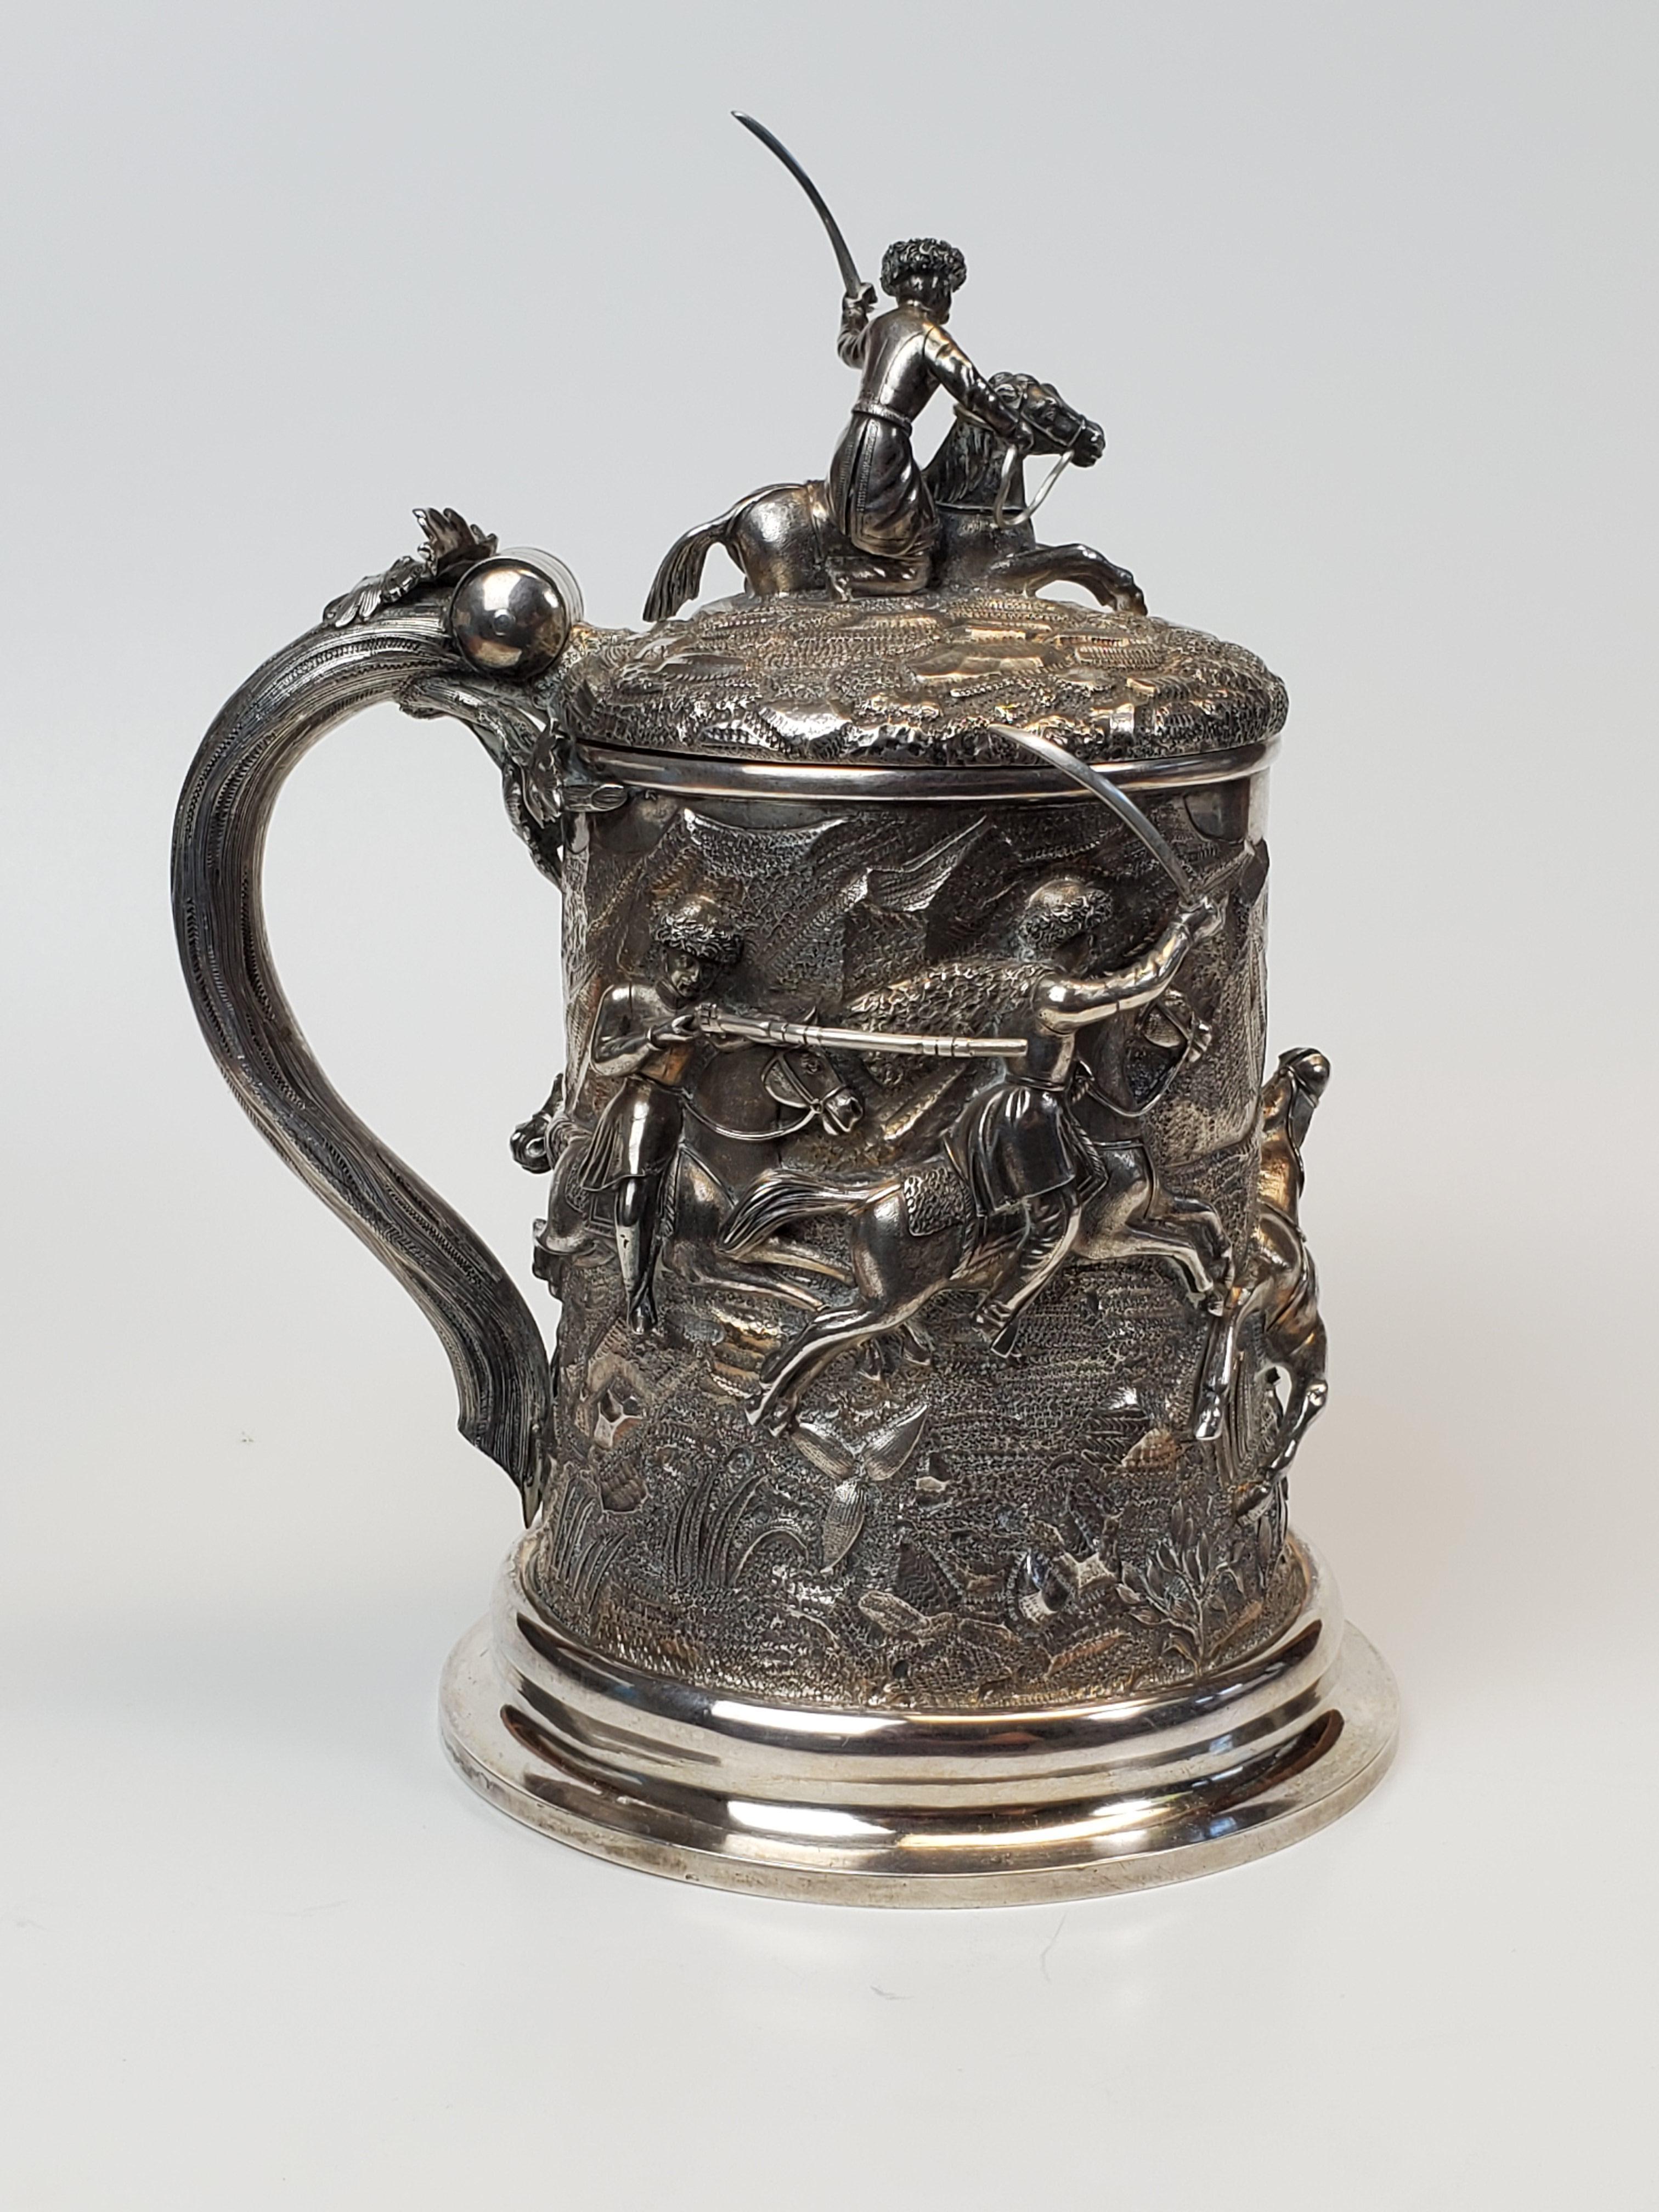 Russian Silver Stein 1854. 0.875 Silver

Every now and then you come across something that is truly extraordinary.
This is one of those of times.

This silver stein was crafted in in 1854 to celebrate the Russian and more specifically Cossack